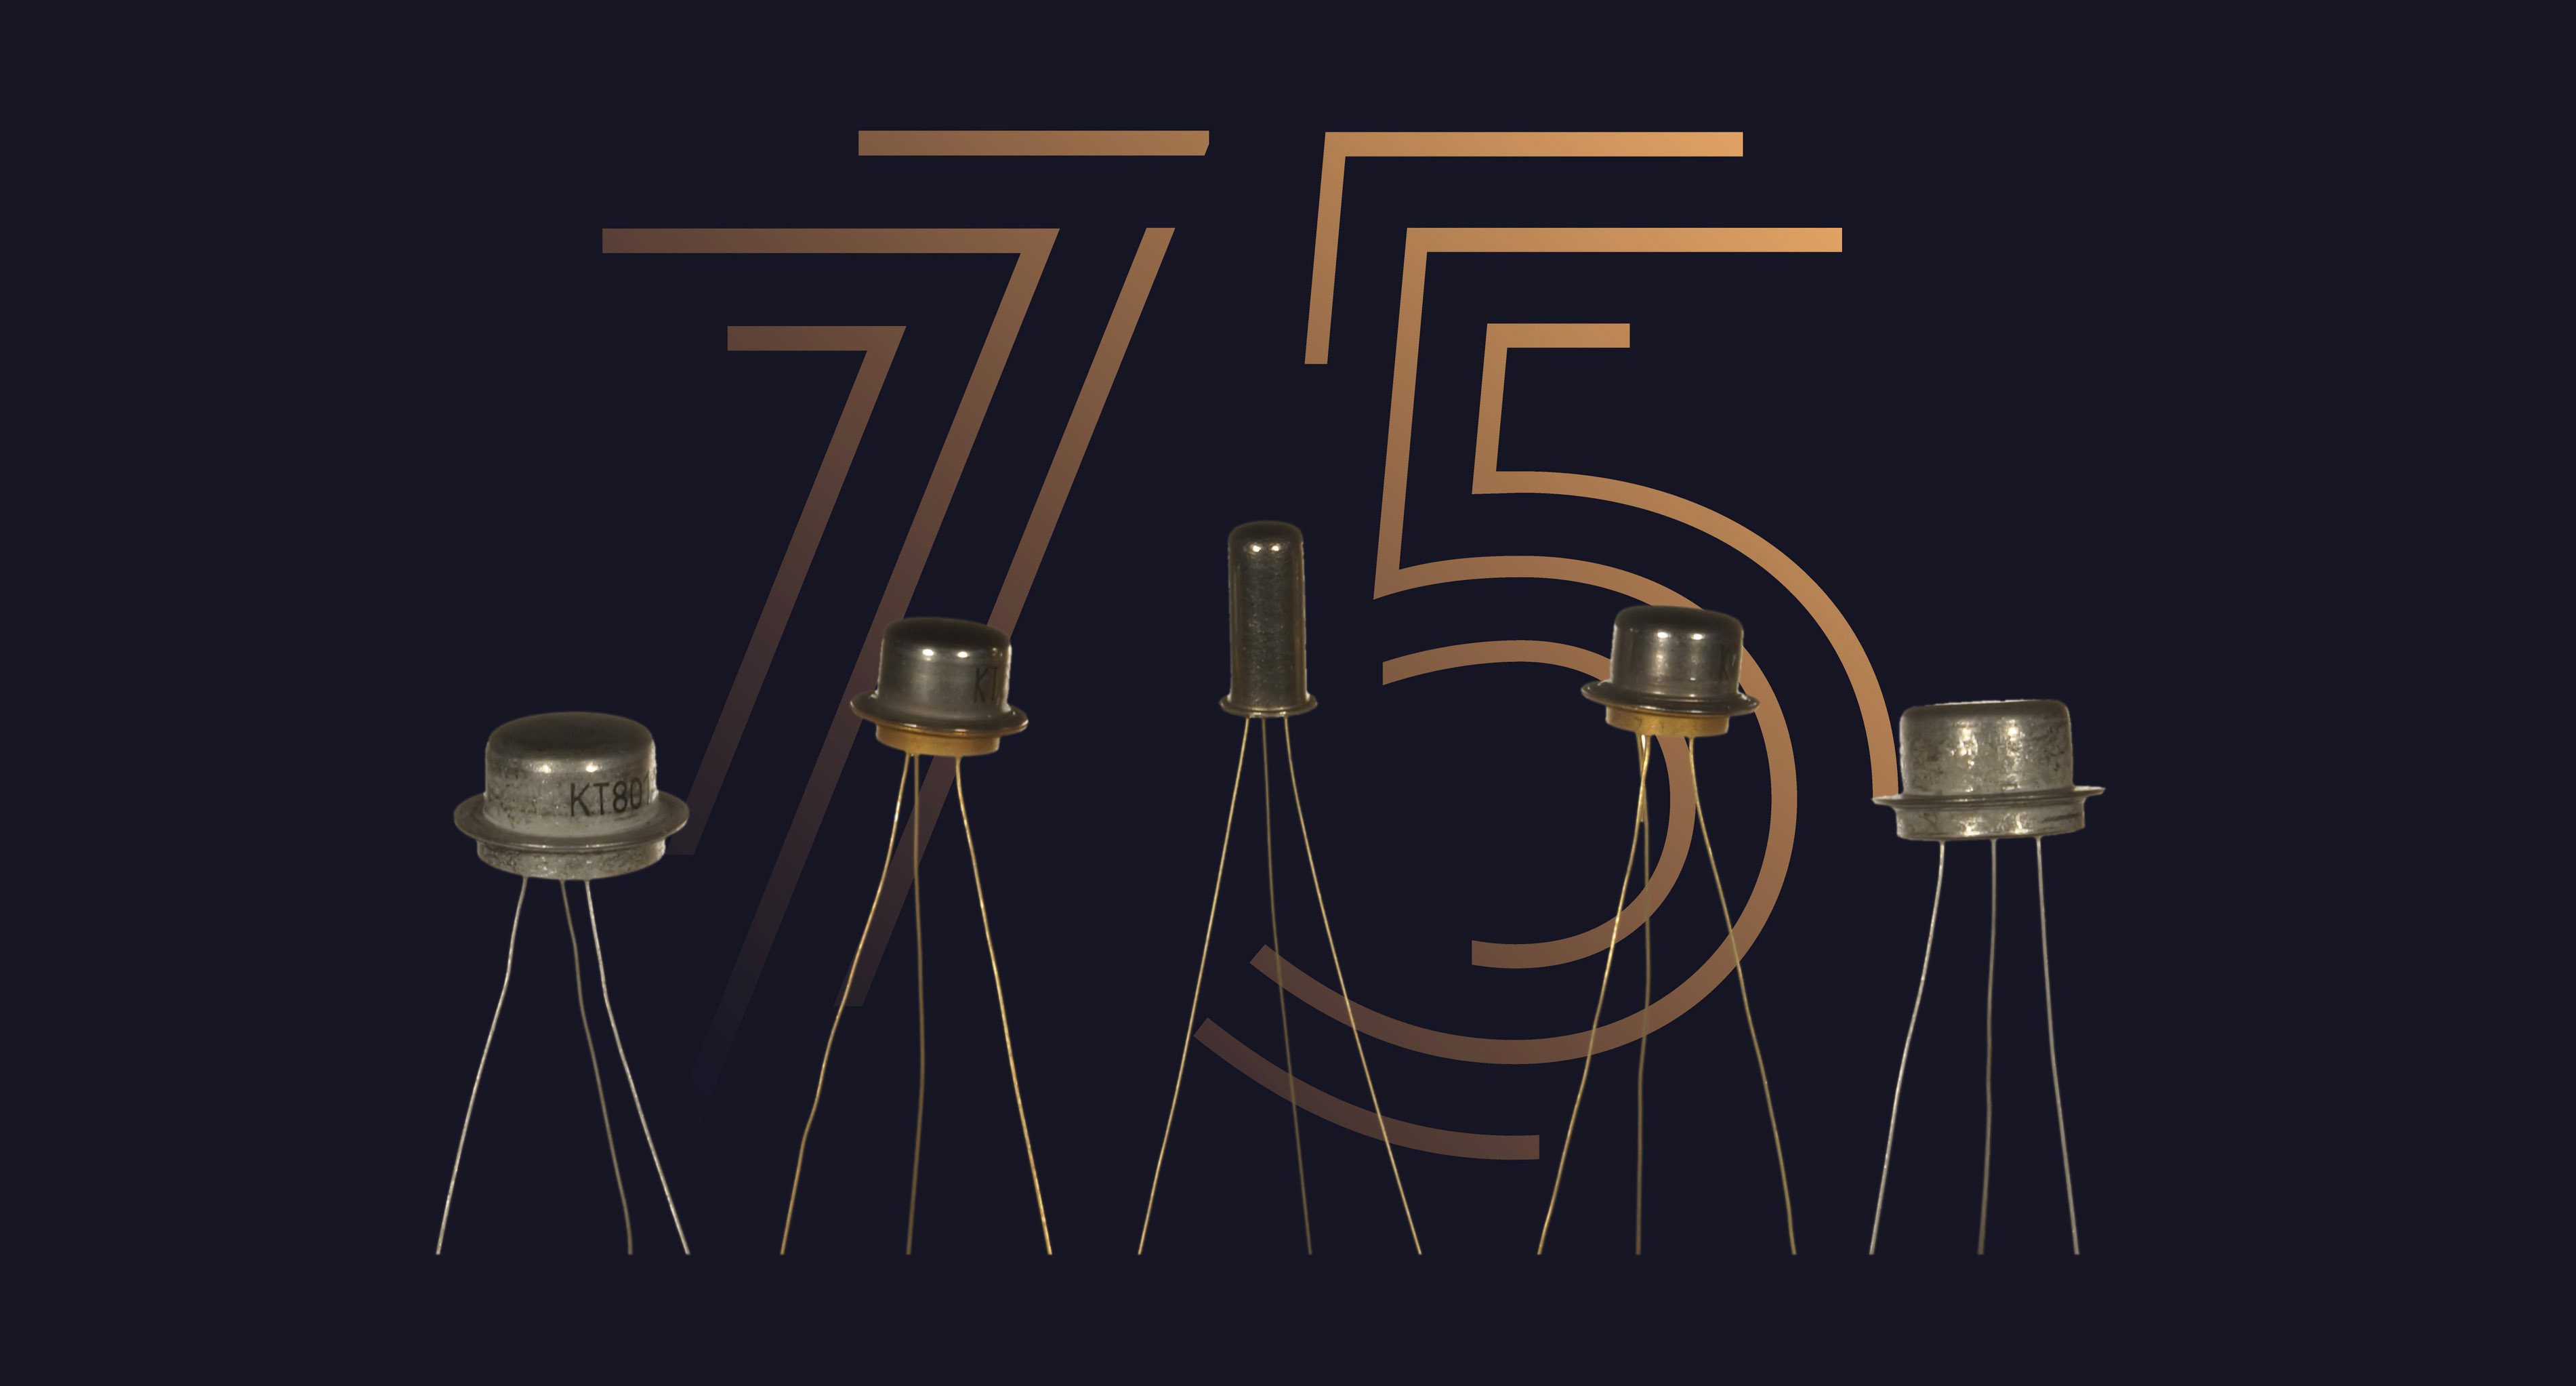 75th anniversary of the transistor.